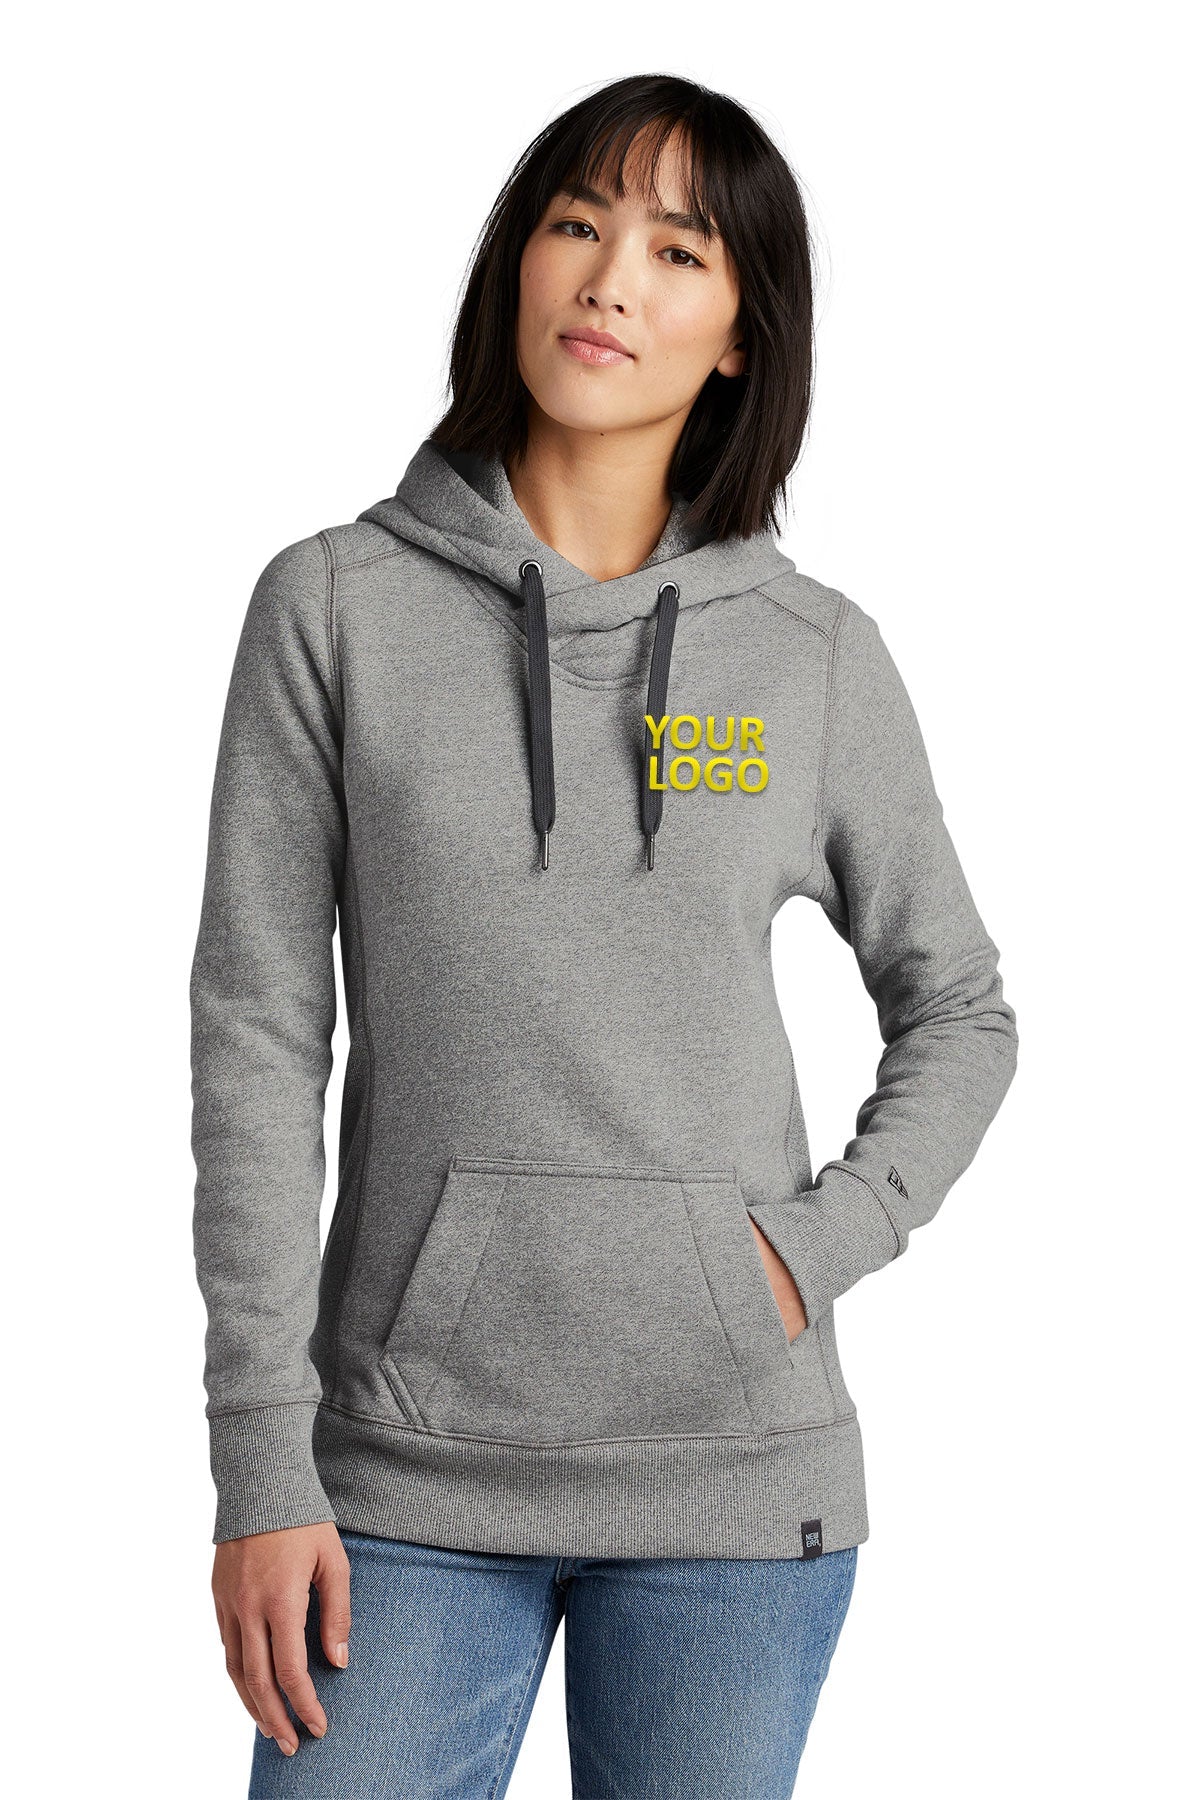 Next Level Unisex French Terry Pullover Hoodie